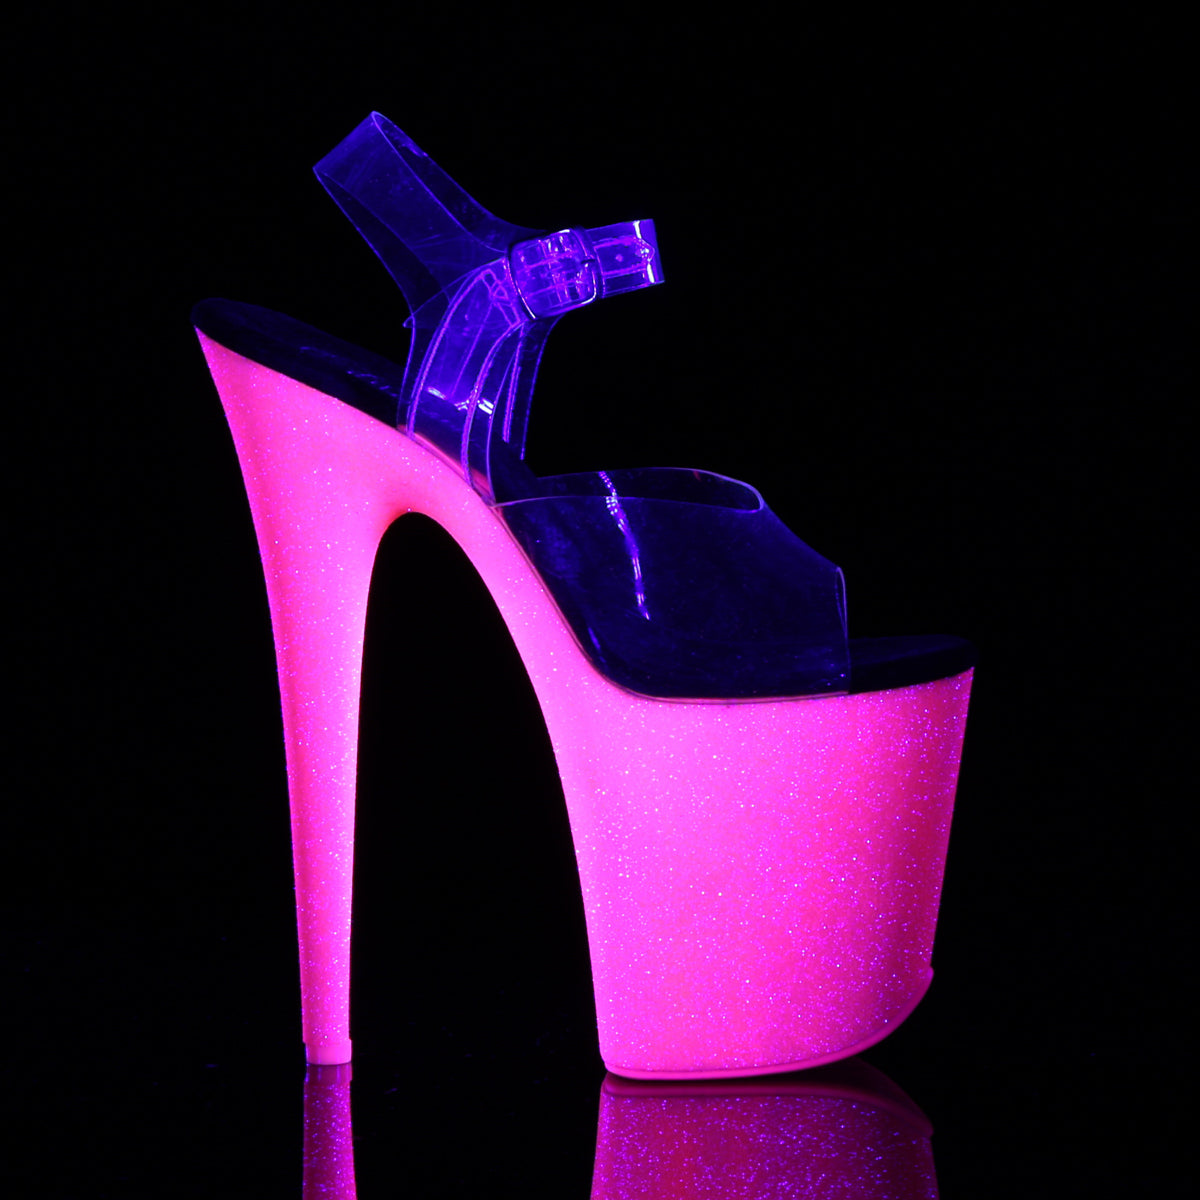 FLAMINGO-808UVG Sexy Shoes Clear Neon Pink Glitter Strippers-Pleaser- Sexy Shoes Fetish Heels